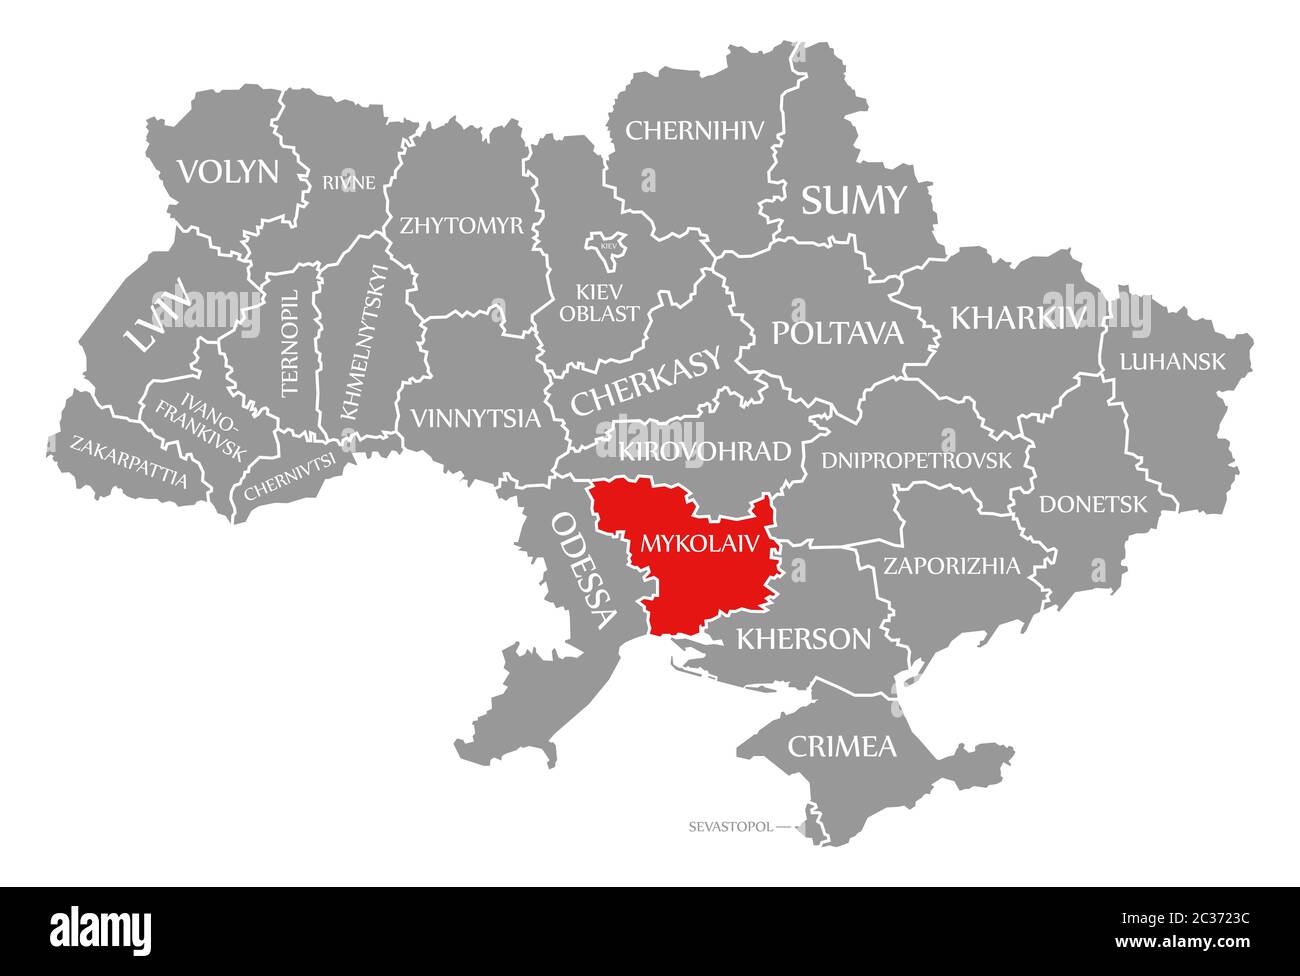 Mykolaiv red highlighted in map of the Ukraine Stock Photo